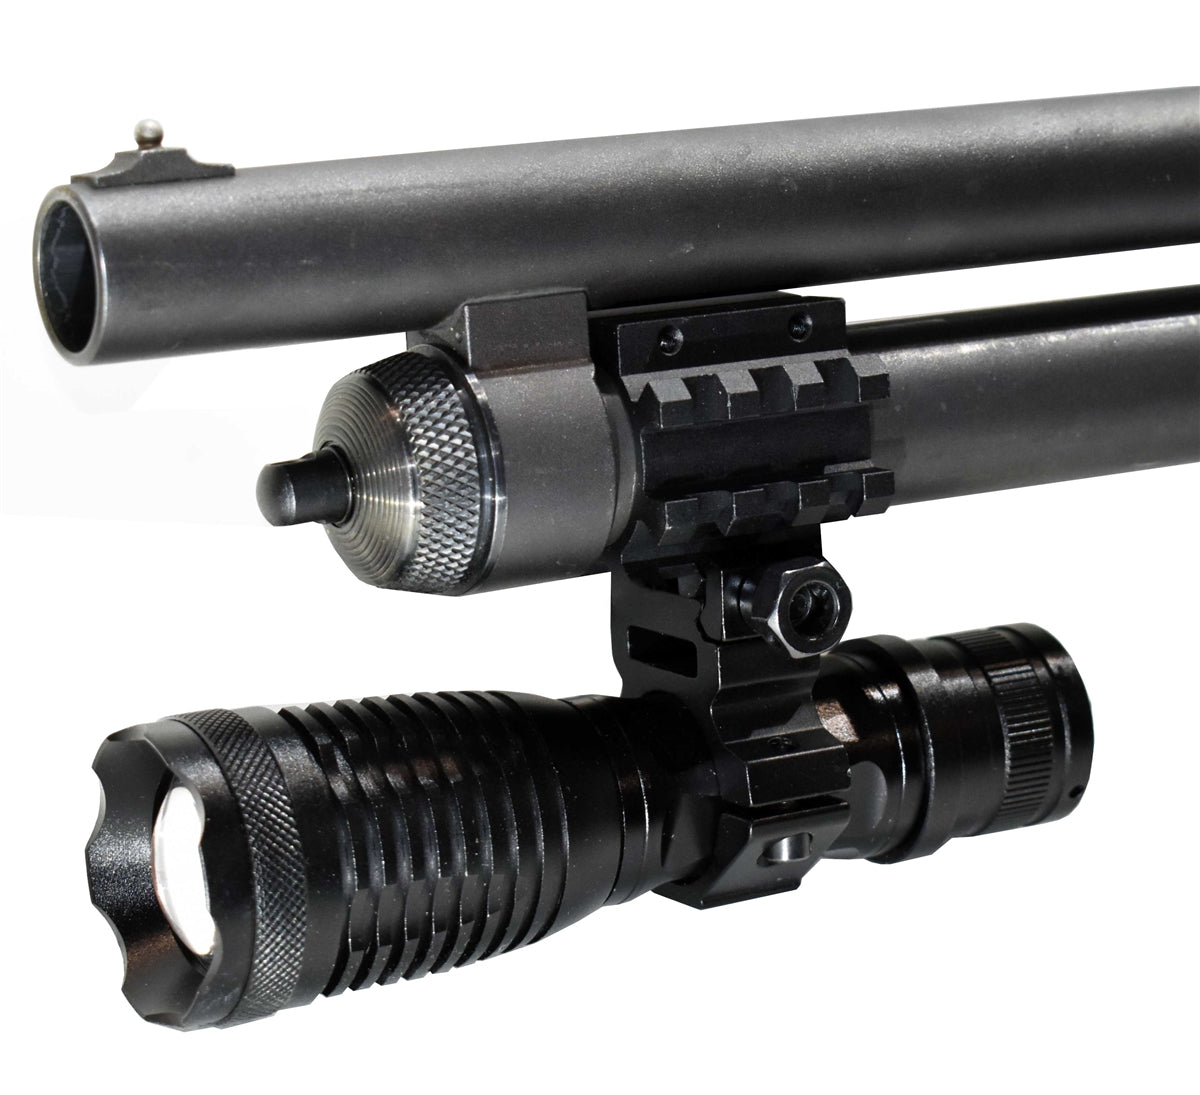 Tactical 1500 Lumen Flashlight With Mount Compatible With 12 Gauge Shotguns.